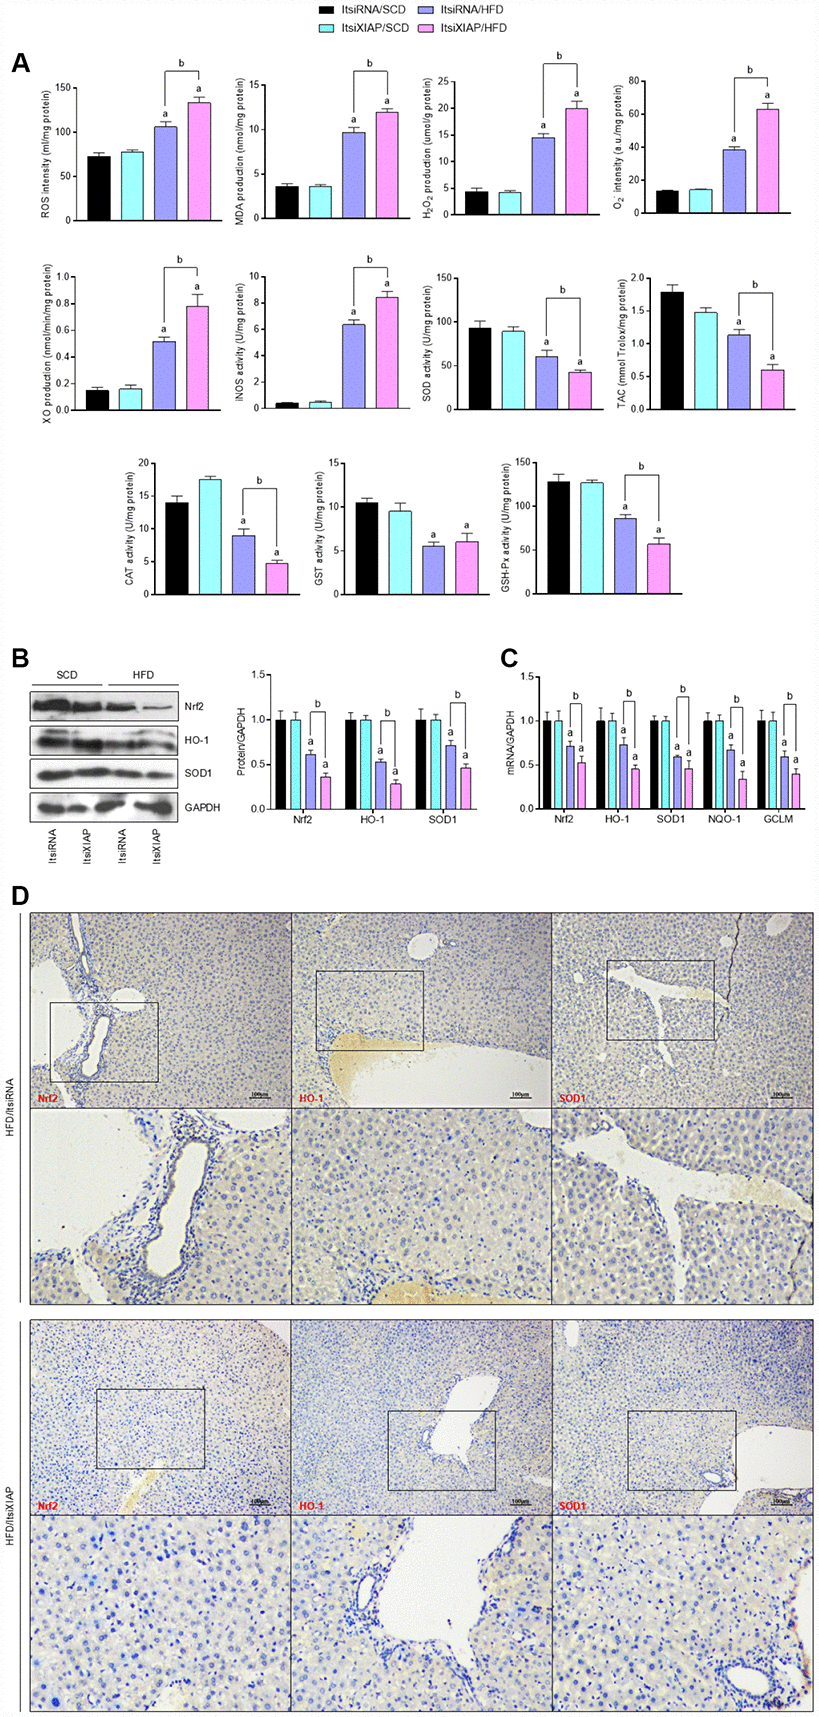 Knockdown of XIAP promotes HFD-induced oxidative stress in liver mice. (A) Calculation of ROS intensity, MDA, H2O2, O2-, XO, iNOS levels, and SOD, TAC, CAT, GST and GSH-Px activity in hepatic tissue samples from each group of mice. (B and C) Representative western blot analysis of the expression of SOD1, HO-1, Nrf2, and quantification of SOD1, HO-1, Nrf2, NQO-1 and GCLM in liver samples. (D) Representative images of immunohistochemical analysis for Nrf2, HO-1 and SOD1 expression in liver tissue sections. For all bar plots shown, data are expressed as the mean ± SEM. n = 8 per group. ap bp 